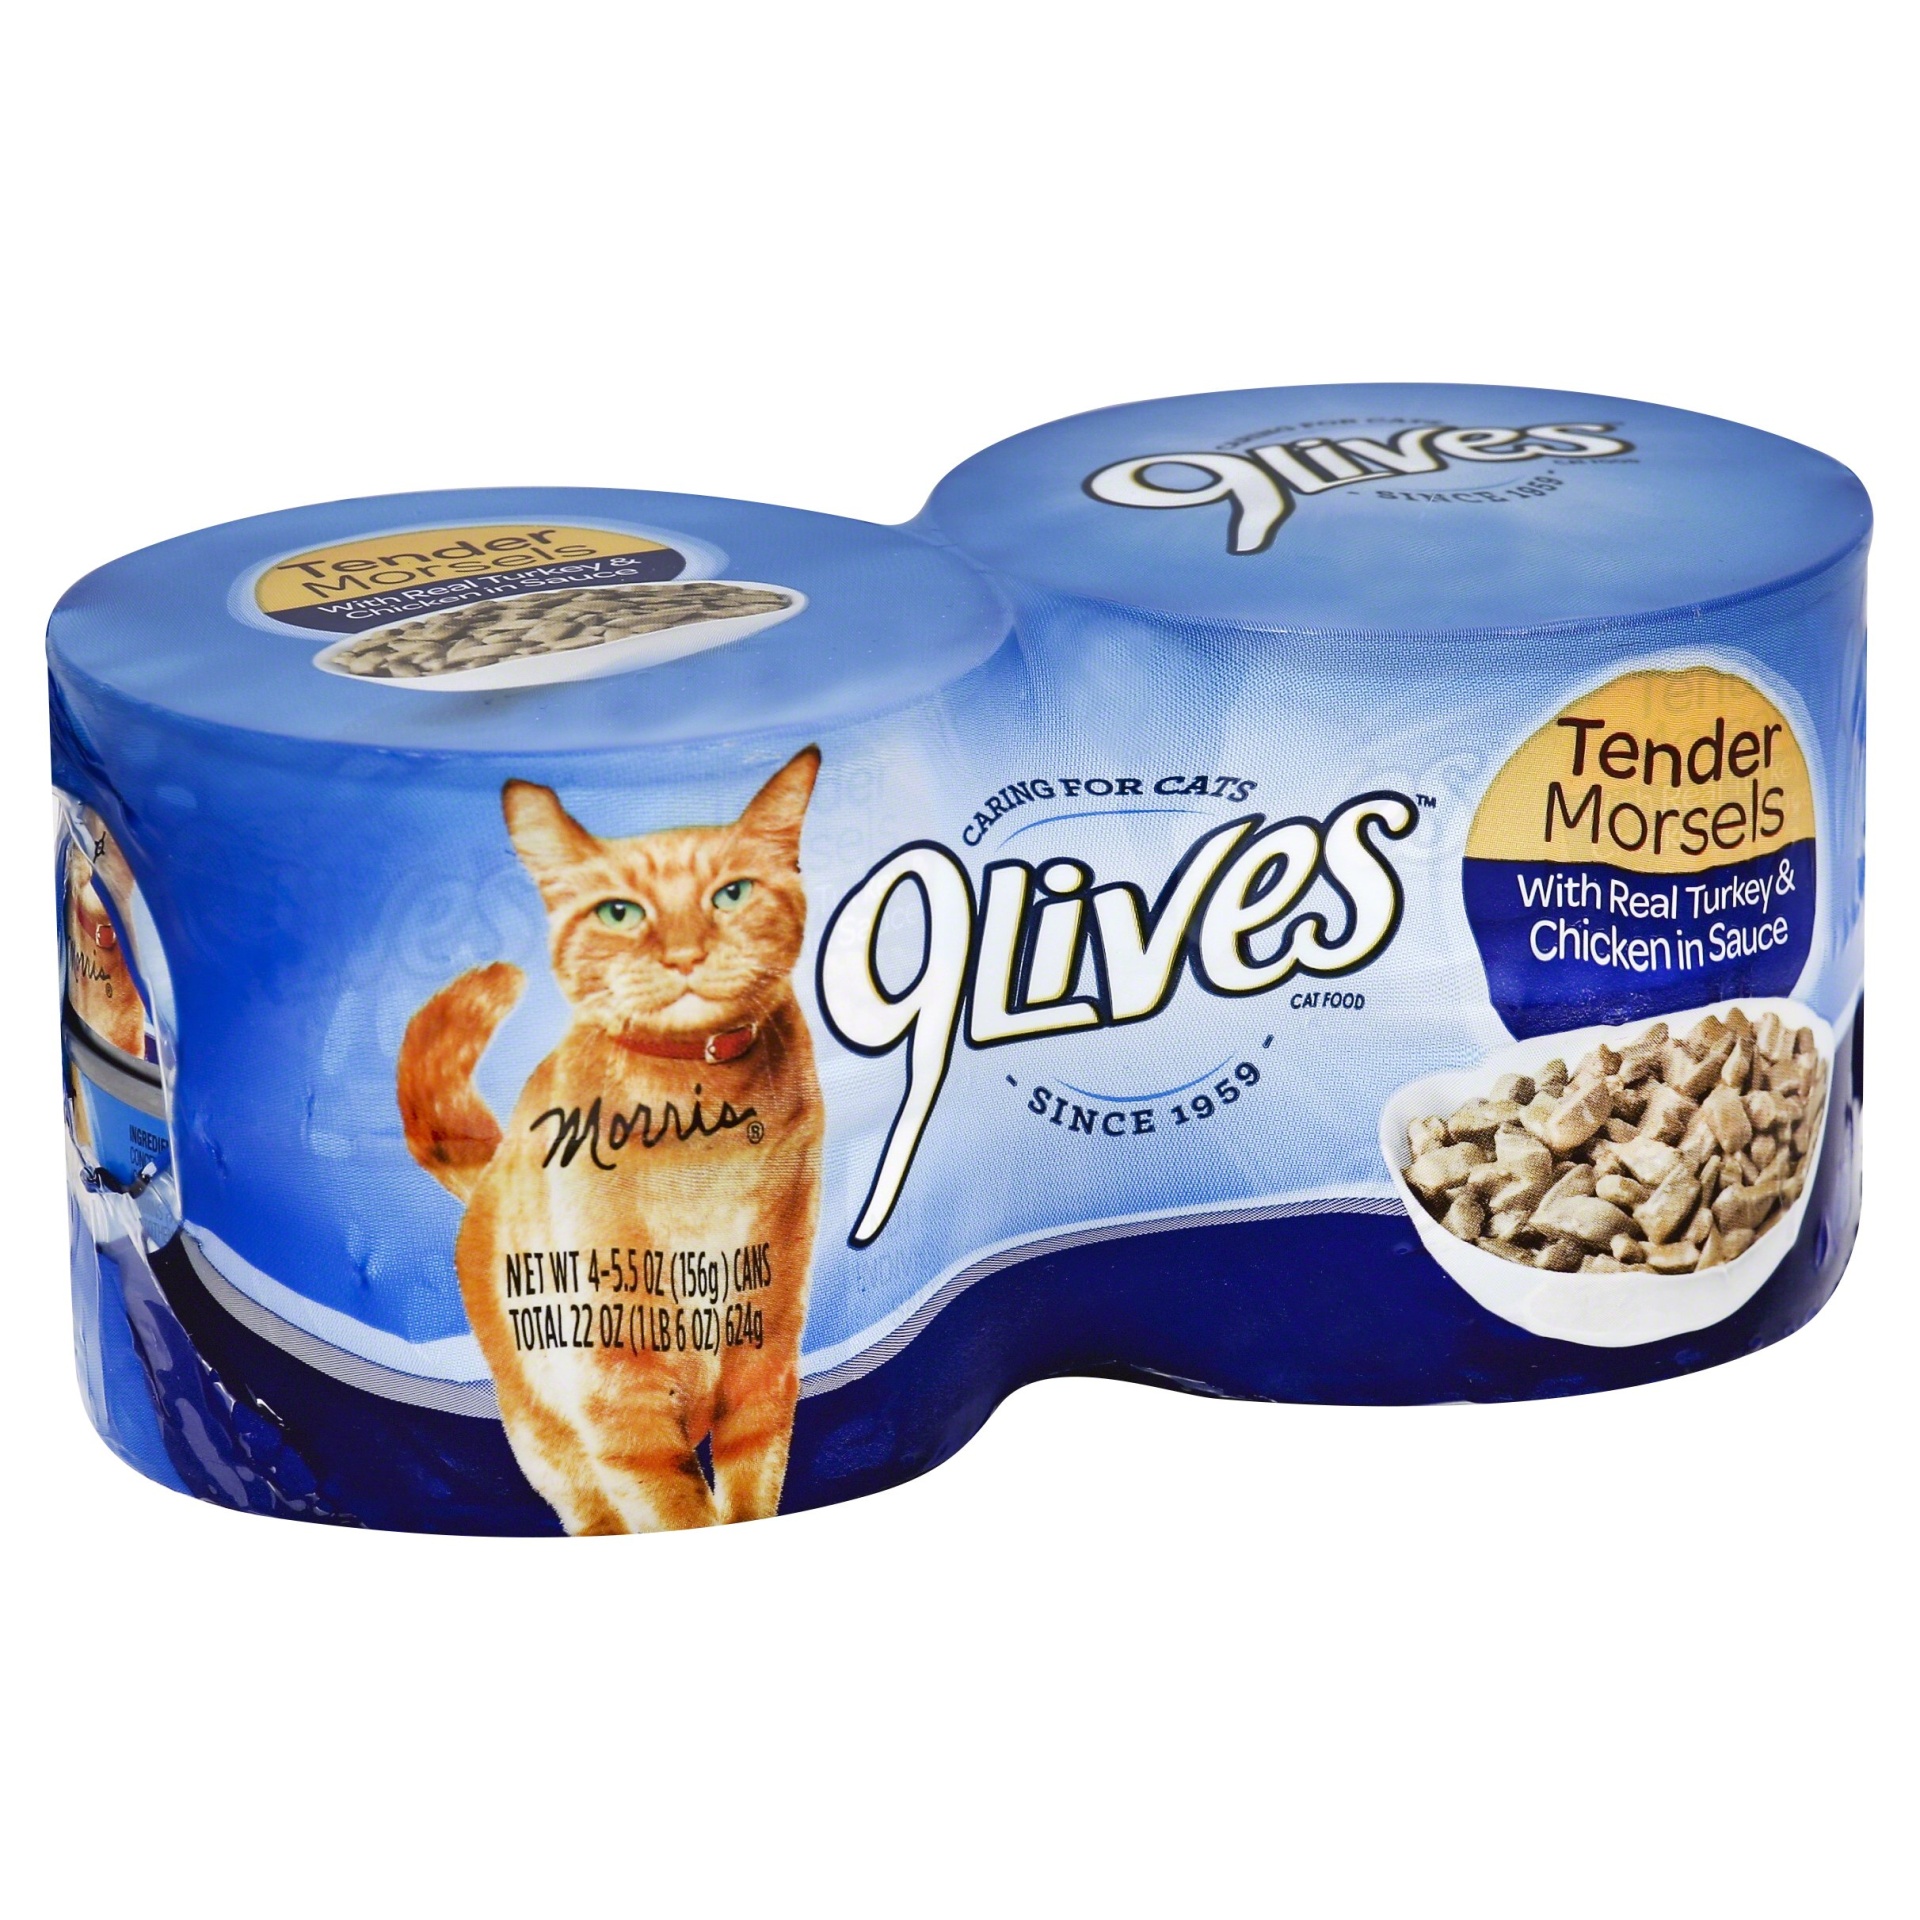 slide 1 of 6, 9Lives Cat Food, with Real Turkey & Chicken in Sauce, Tender Morsels, 4 ct